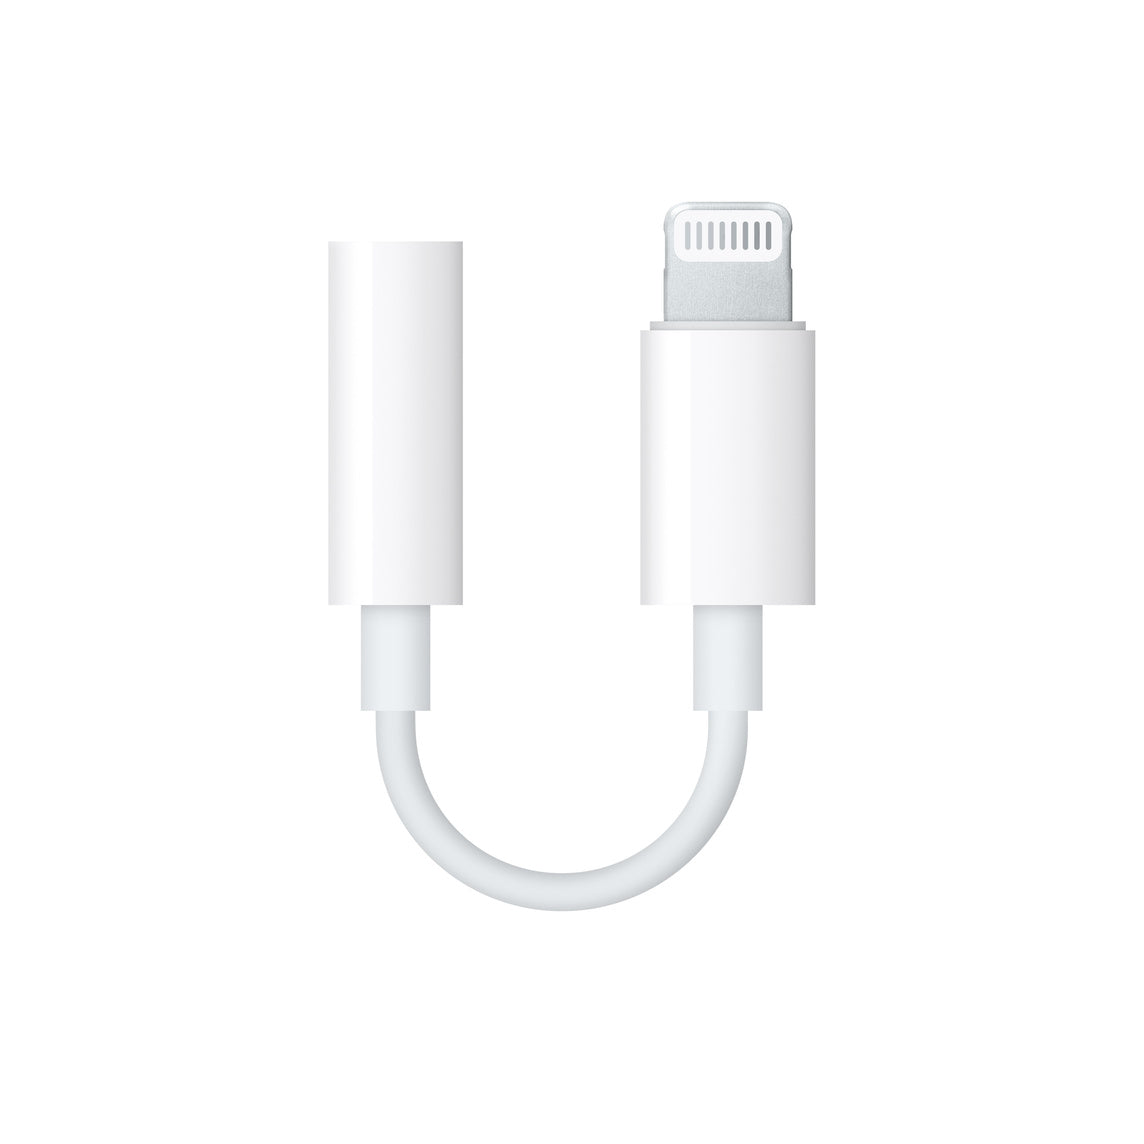 Apple iPhone 5 Heaphone Jack Connector (Lightning to 3.5mm)